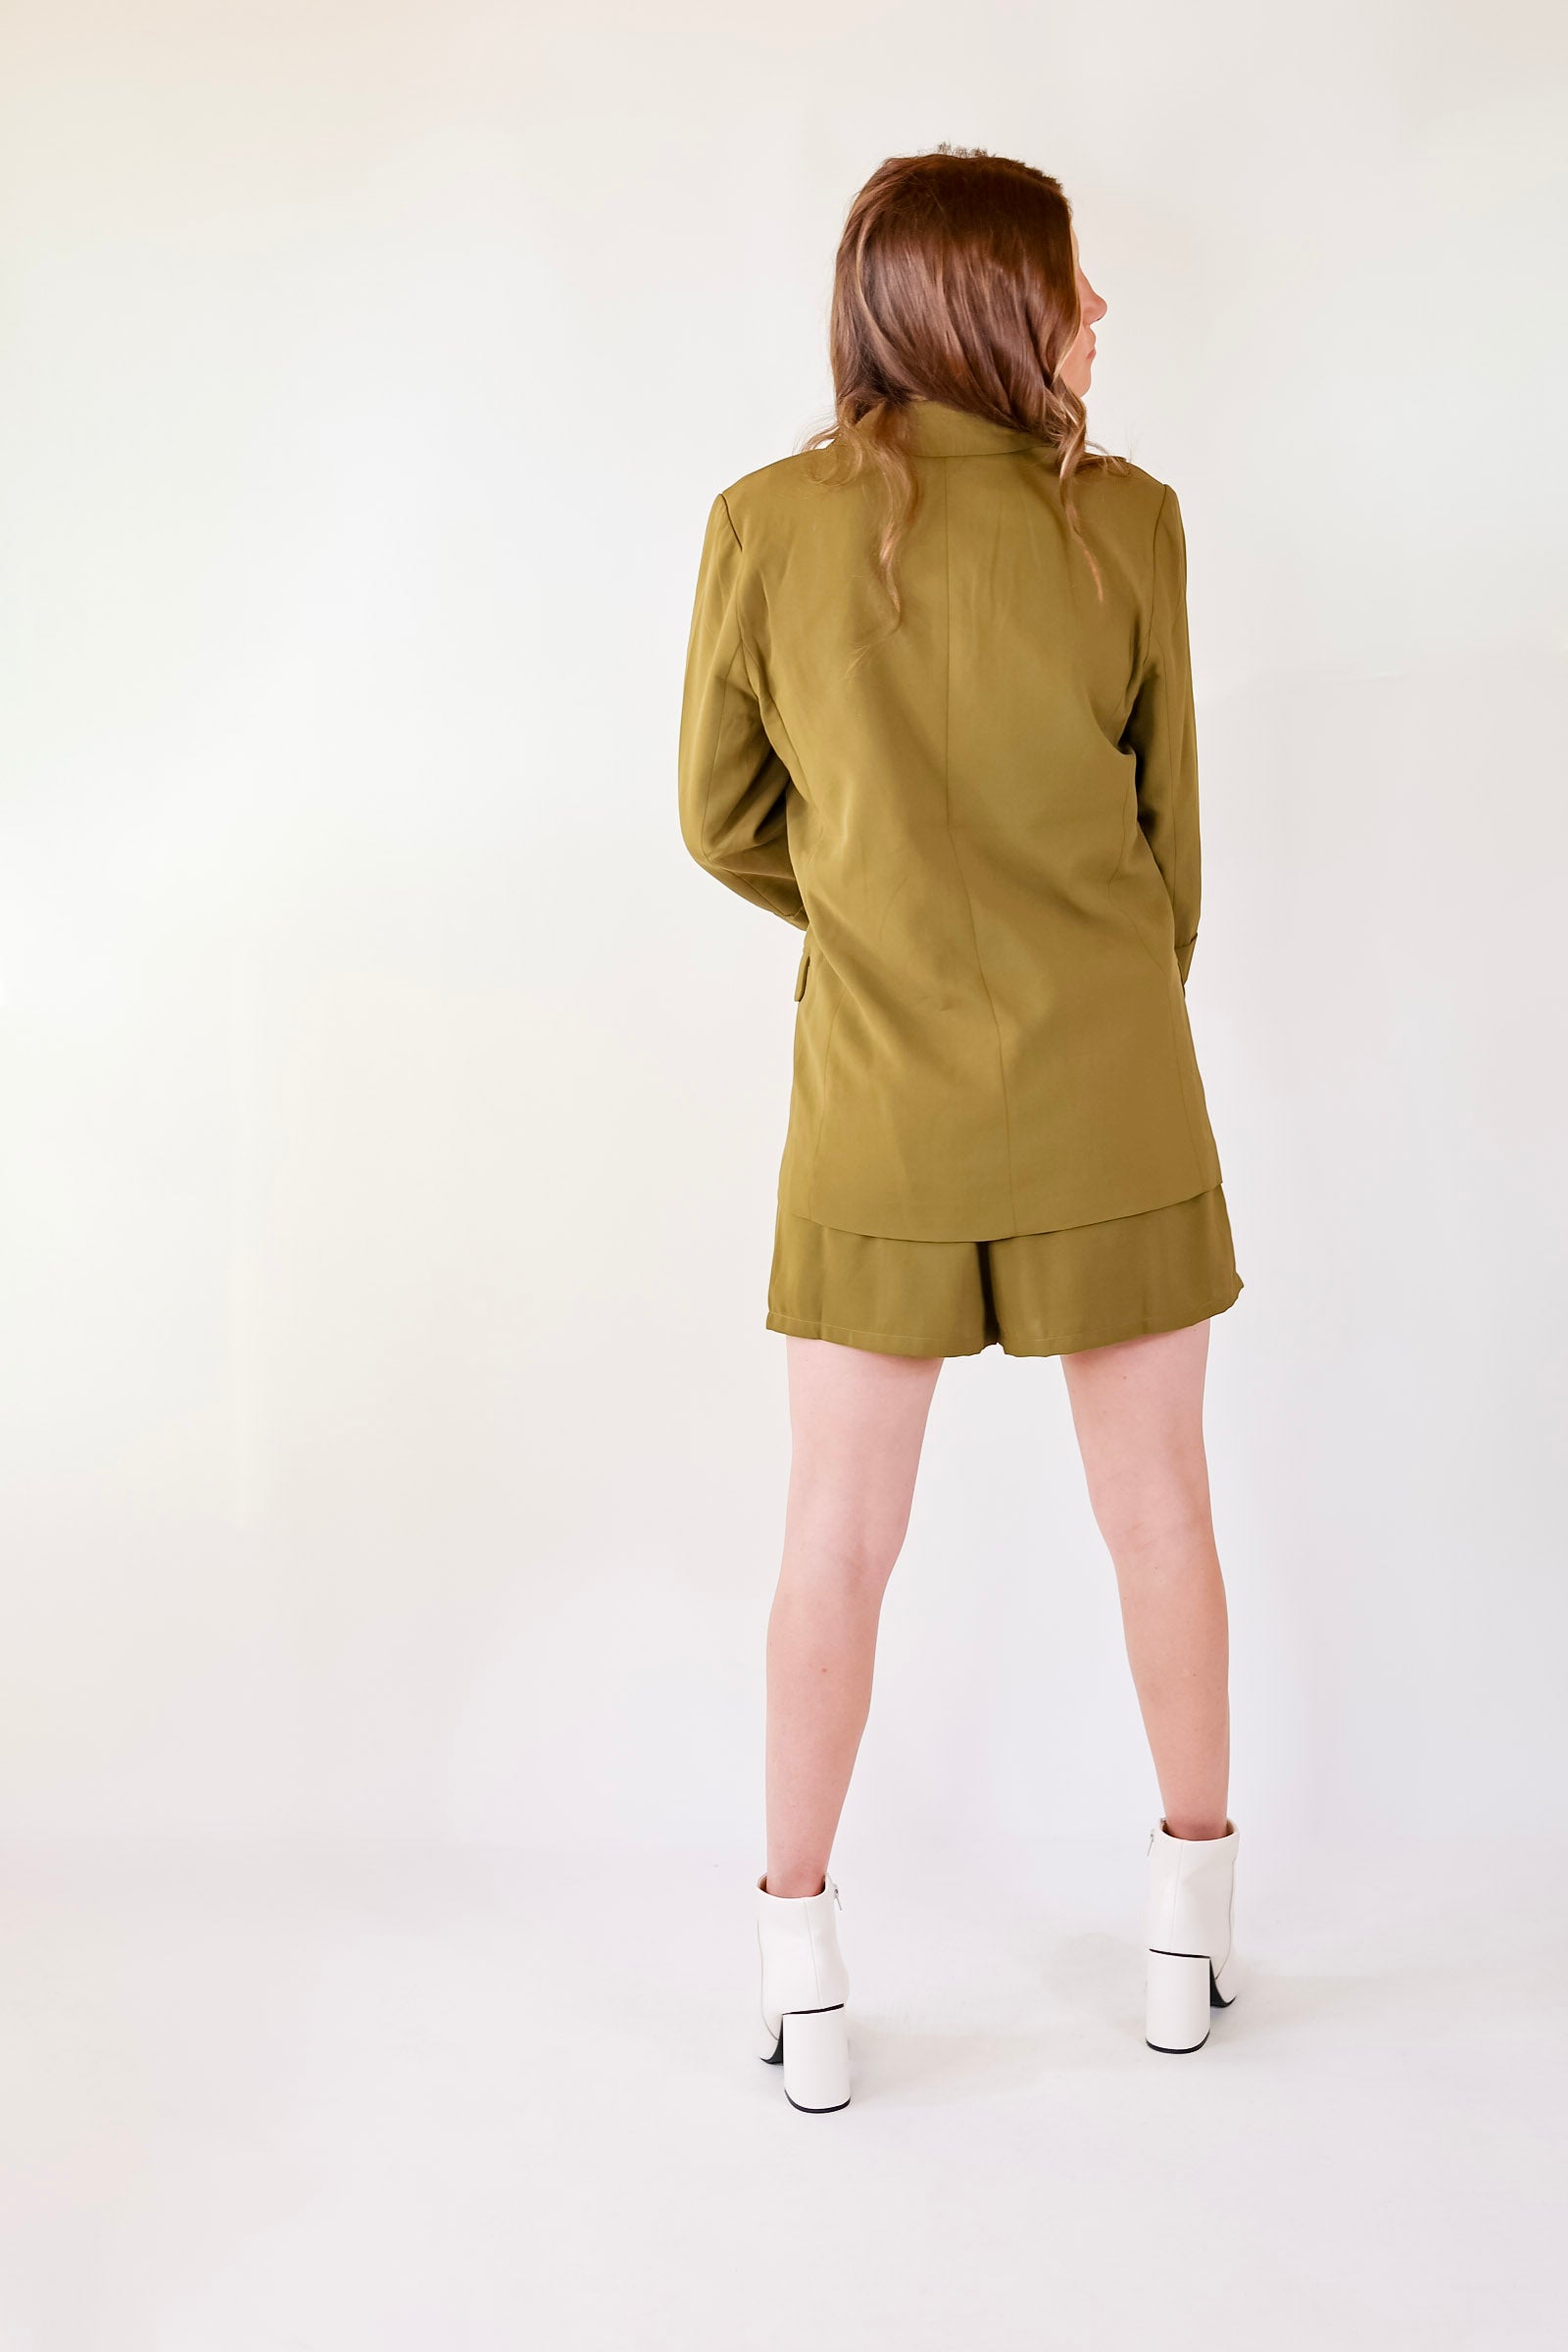 Fine Like Wine 3/4 Sleeve Blazer in Olive Green - Giddy Up Glamour Boutique